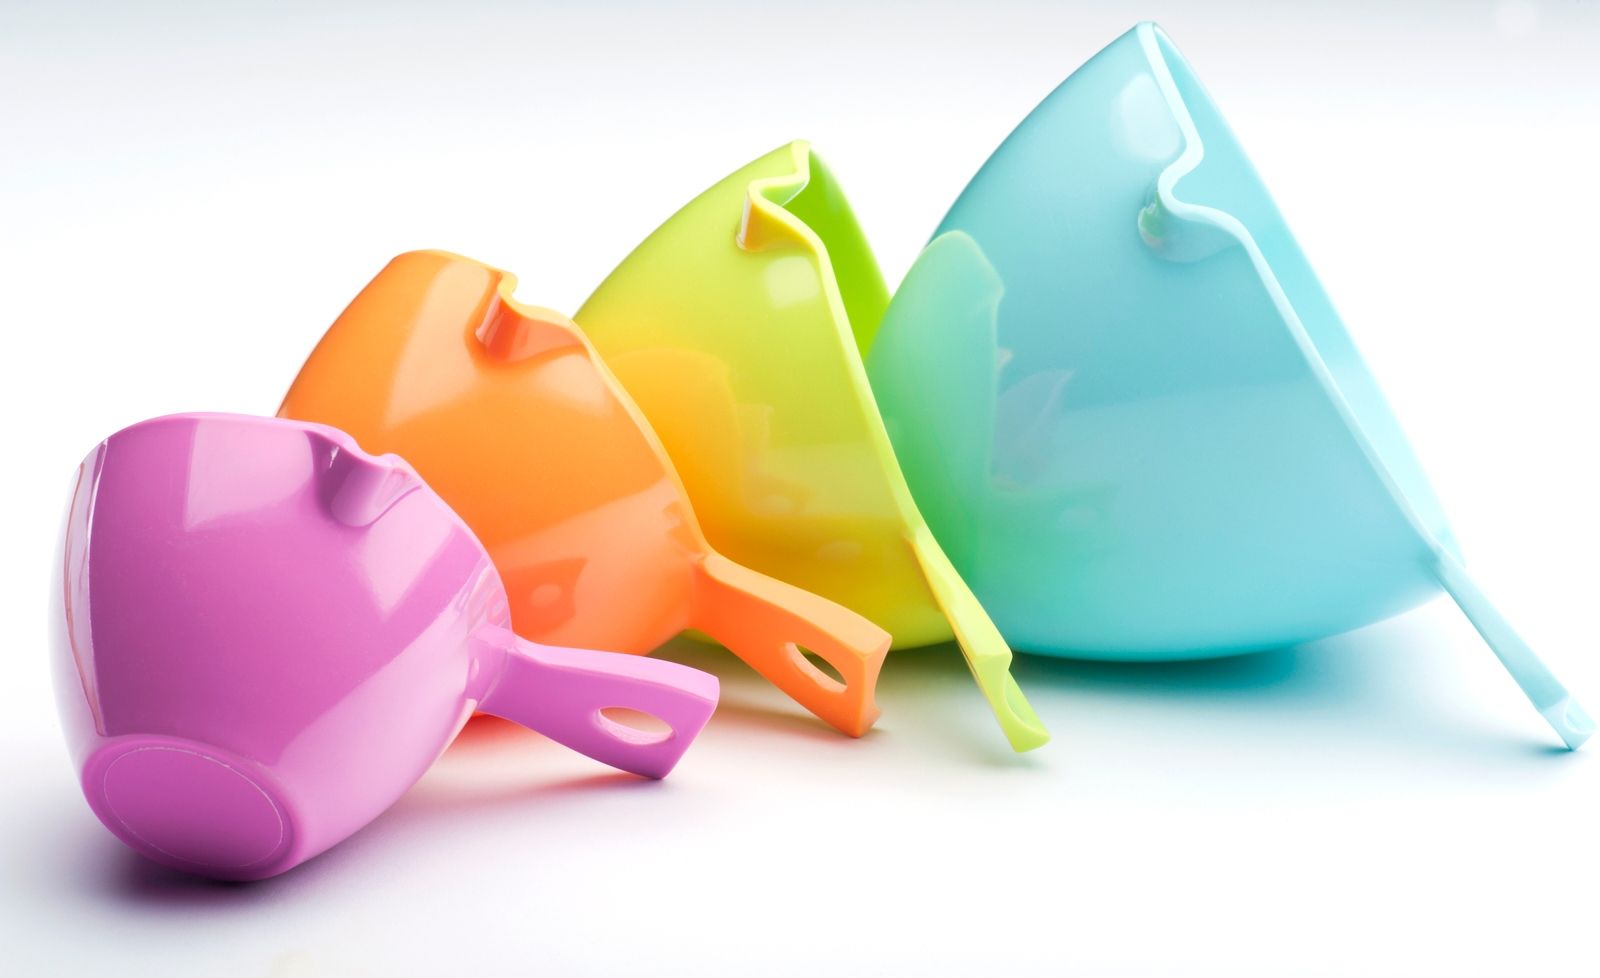 Colorful Set of Measuring Cups